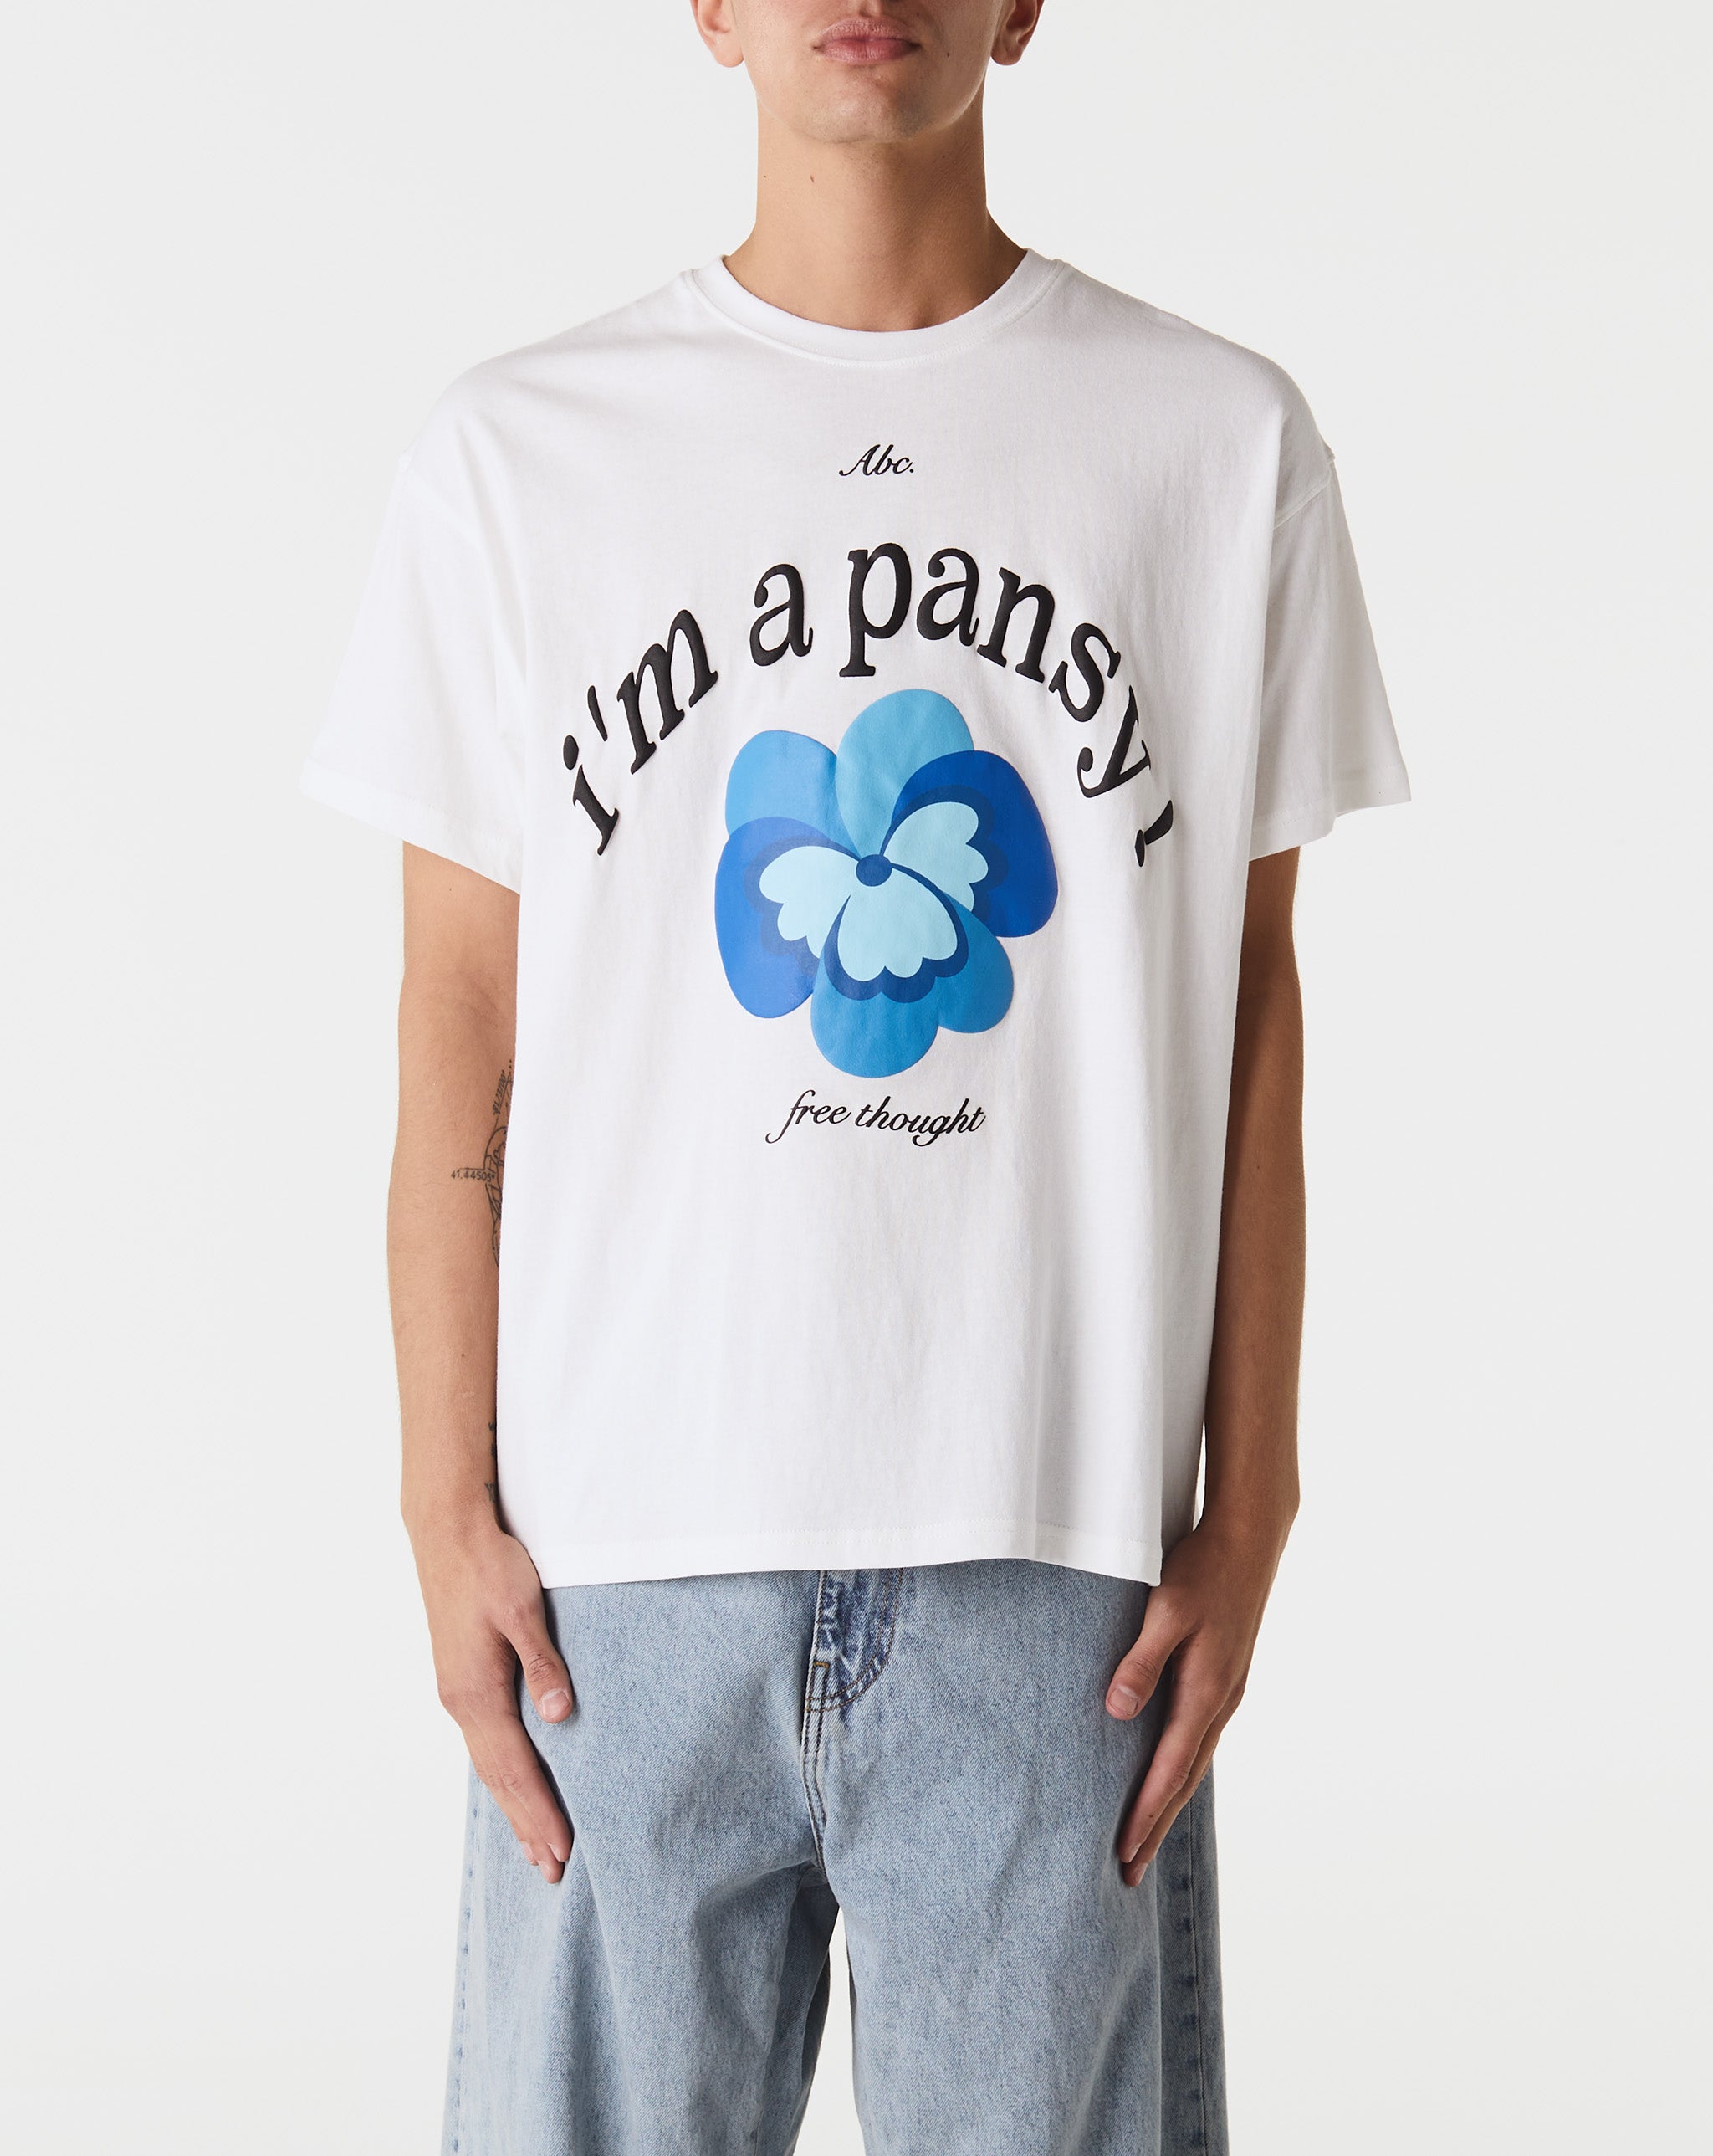 I agree with the Pansy T-Shirt  - Cheap Urlfreeze Jordan outlet